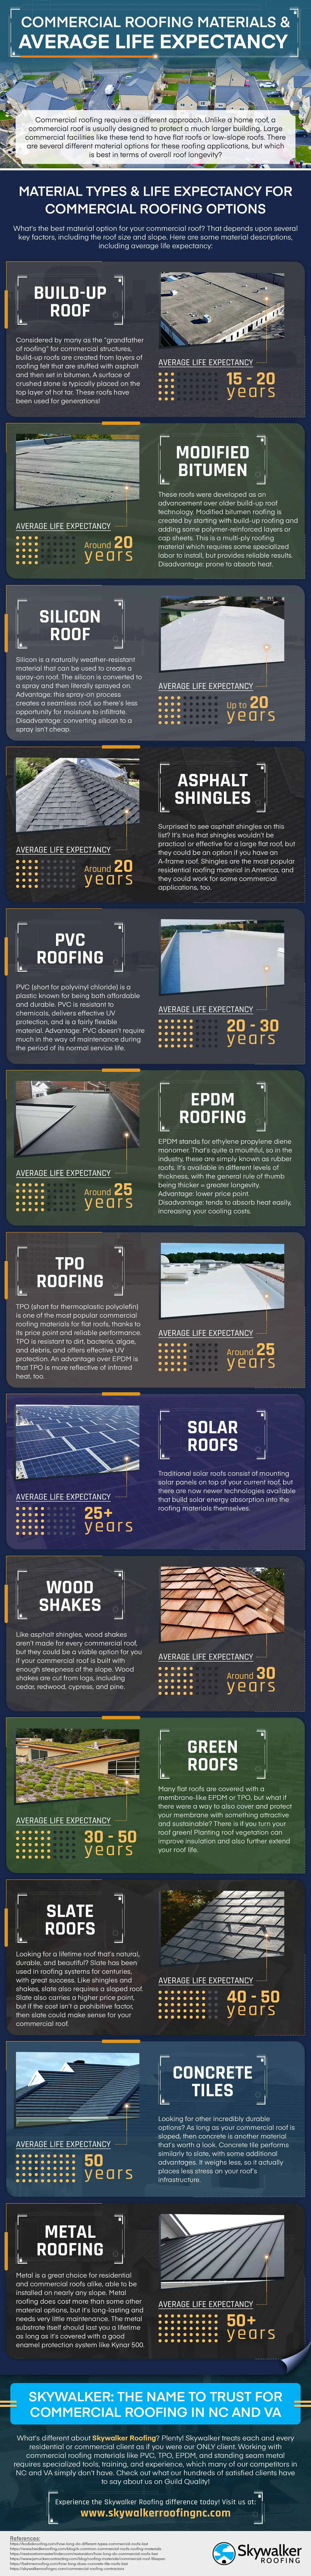 https://skywalkerroofingnc.com/infographics/commercial-roofing-materials-average-life-expectancy